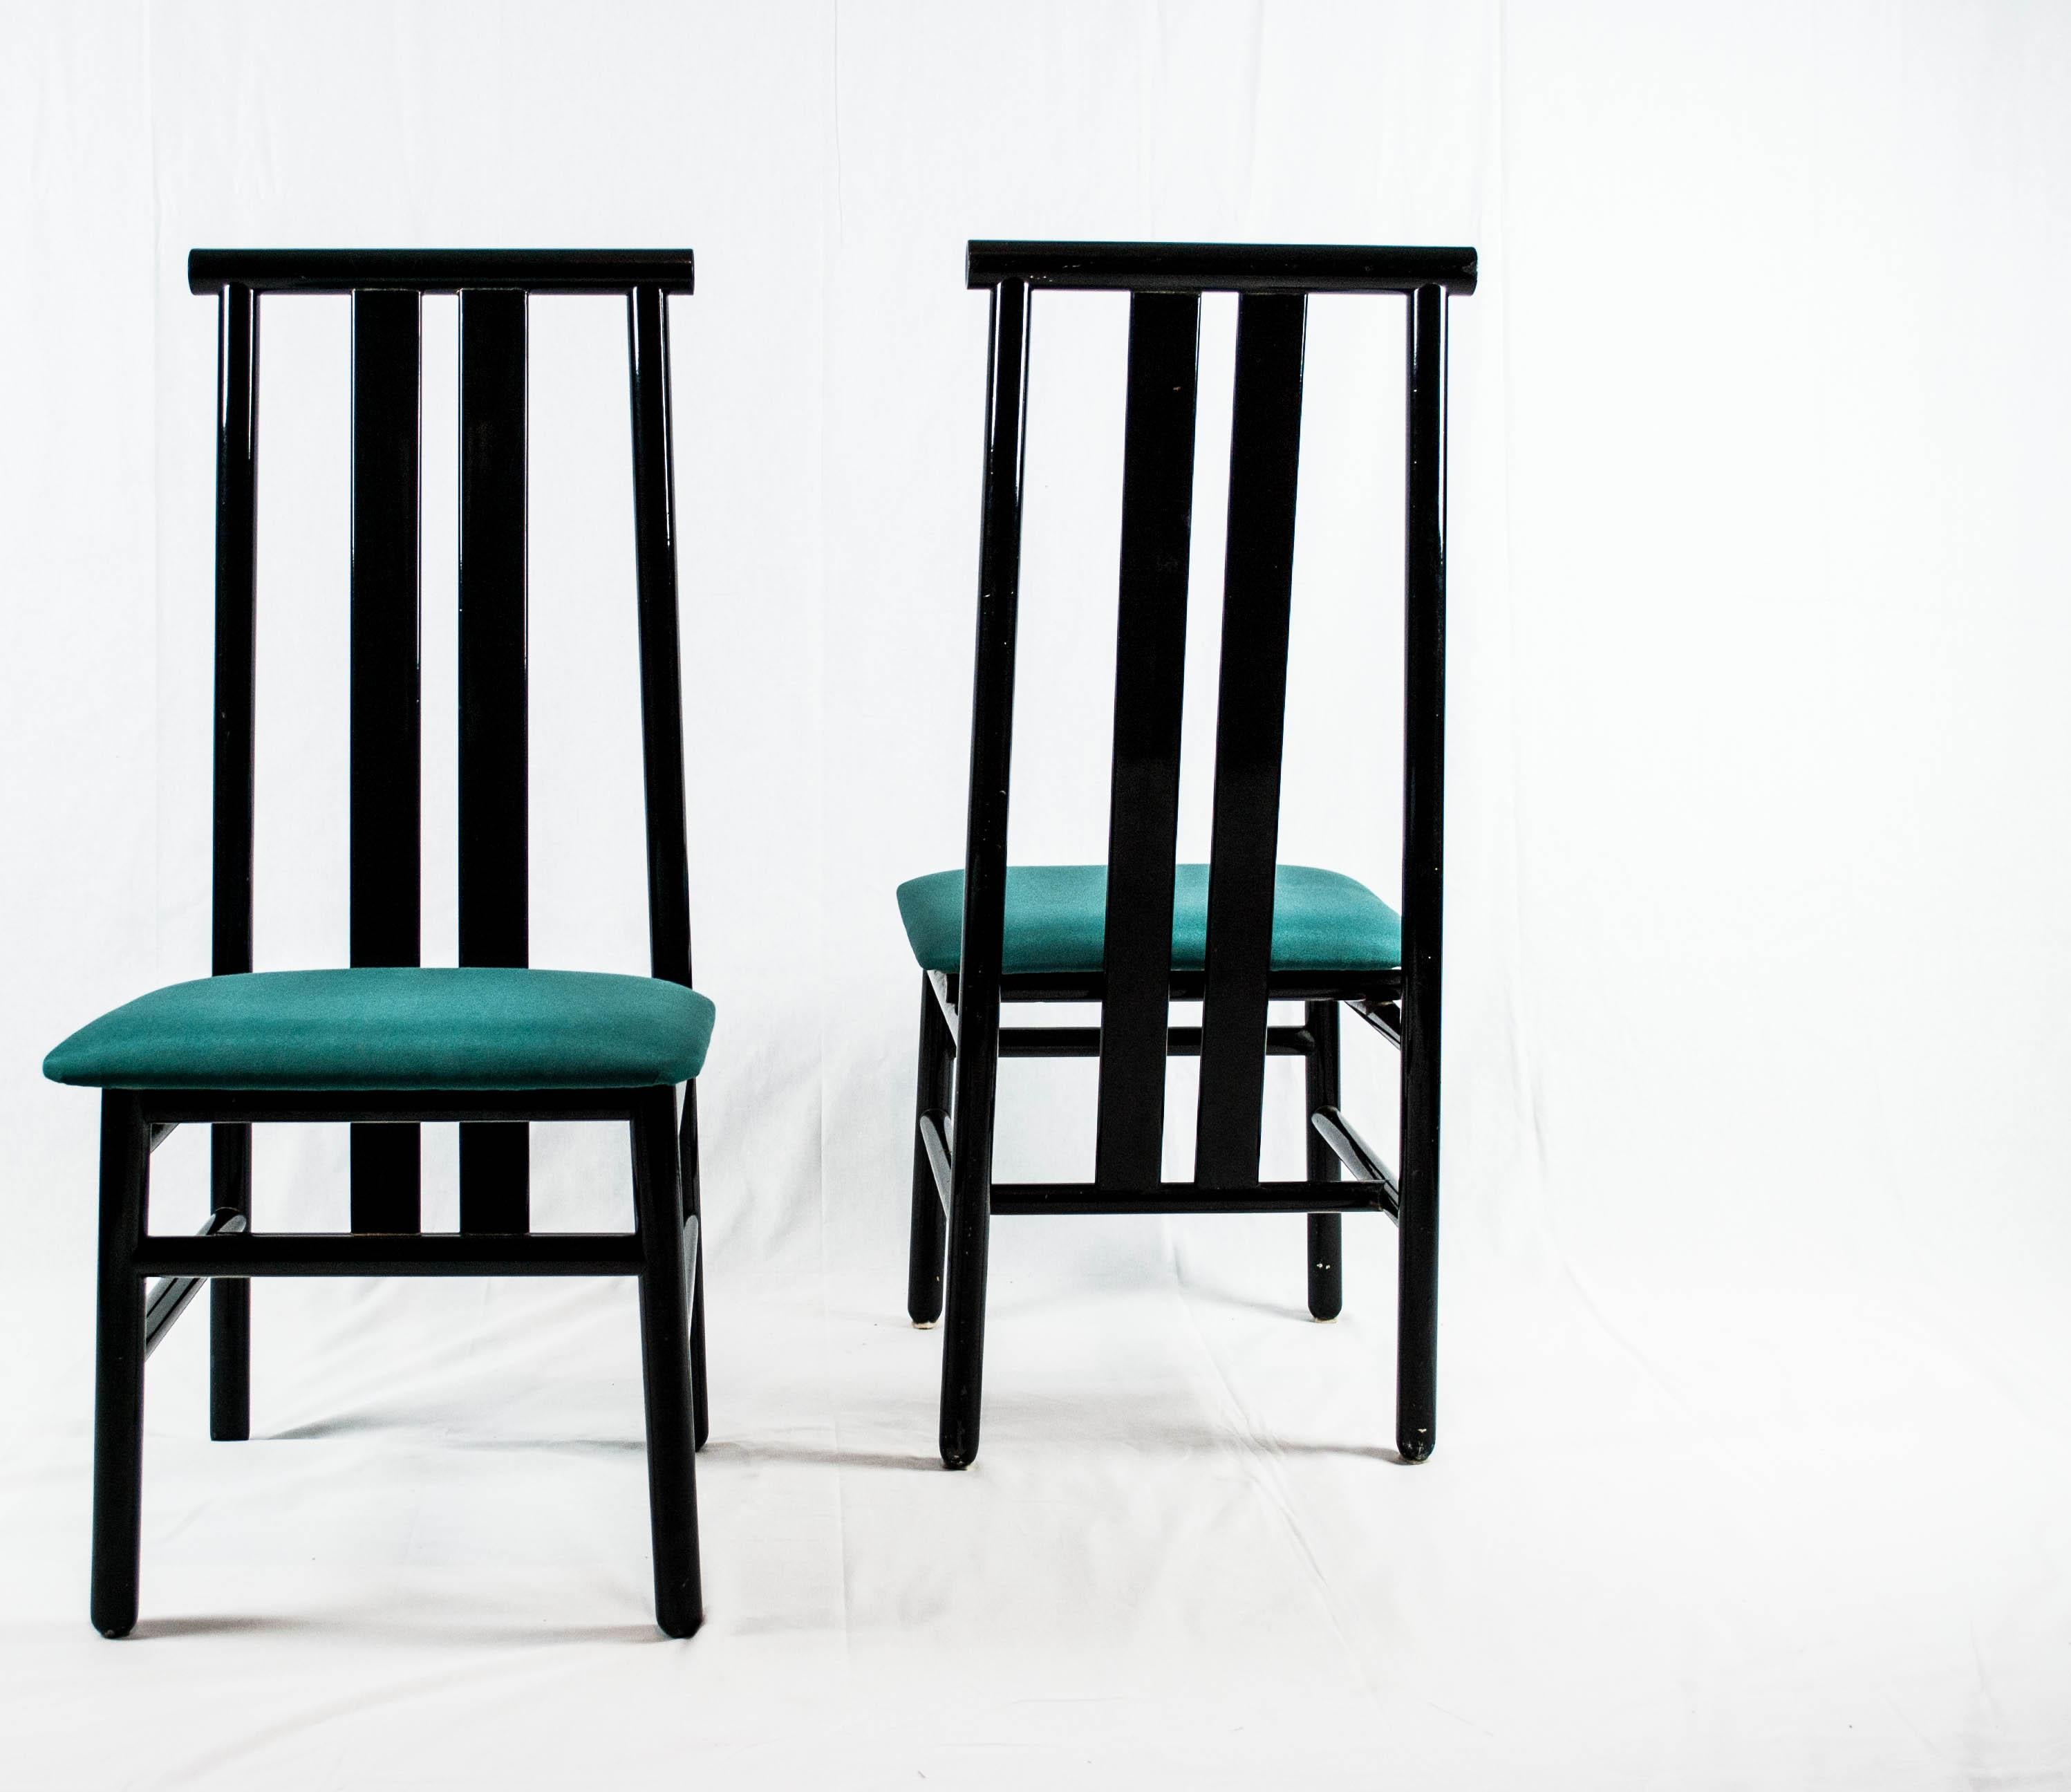 Sarian 'Zea' Modern High-Backed Black Lacquered Chairs for Tisettanta, Italy In Good Condition For Sale In Cassina de'Pecchi, IT